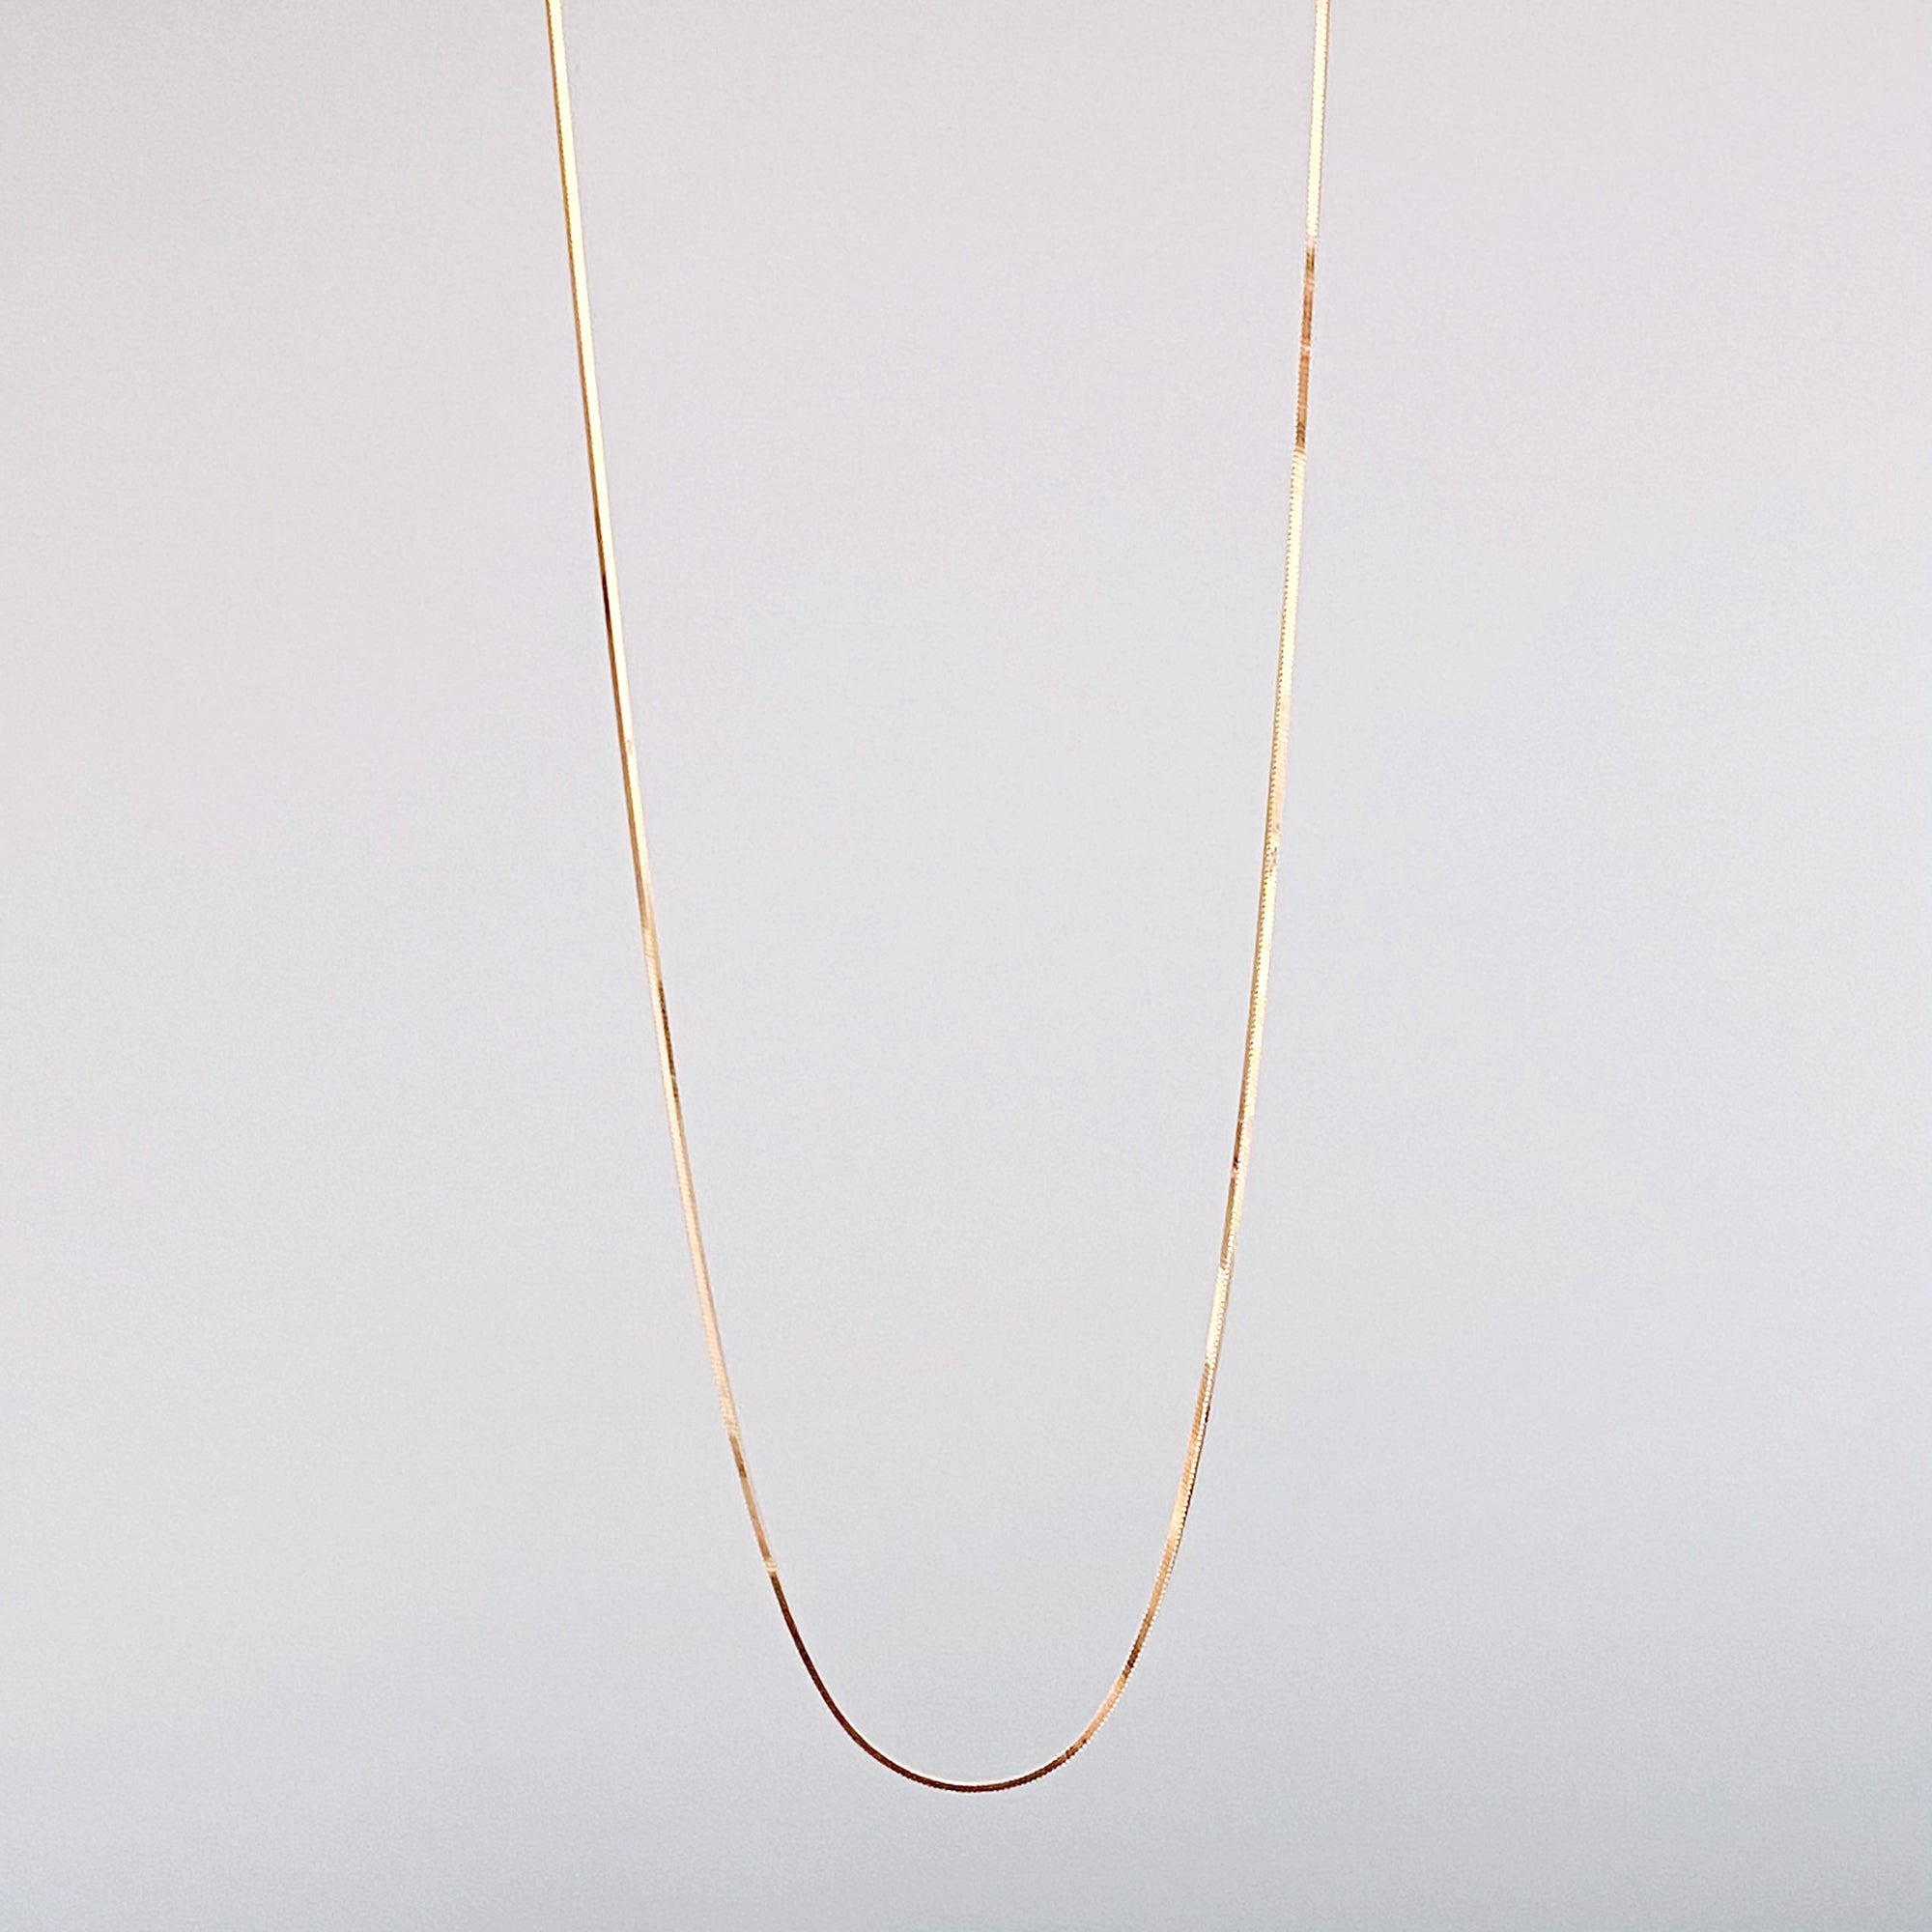 Square Snake Chain - Long